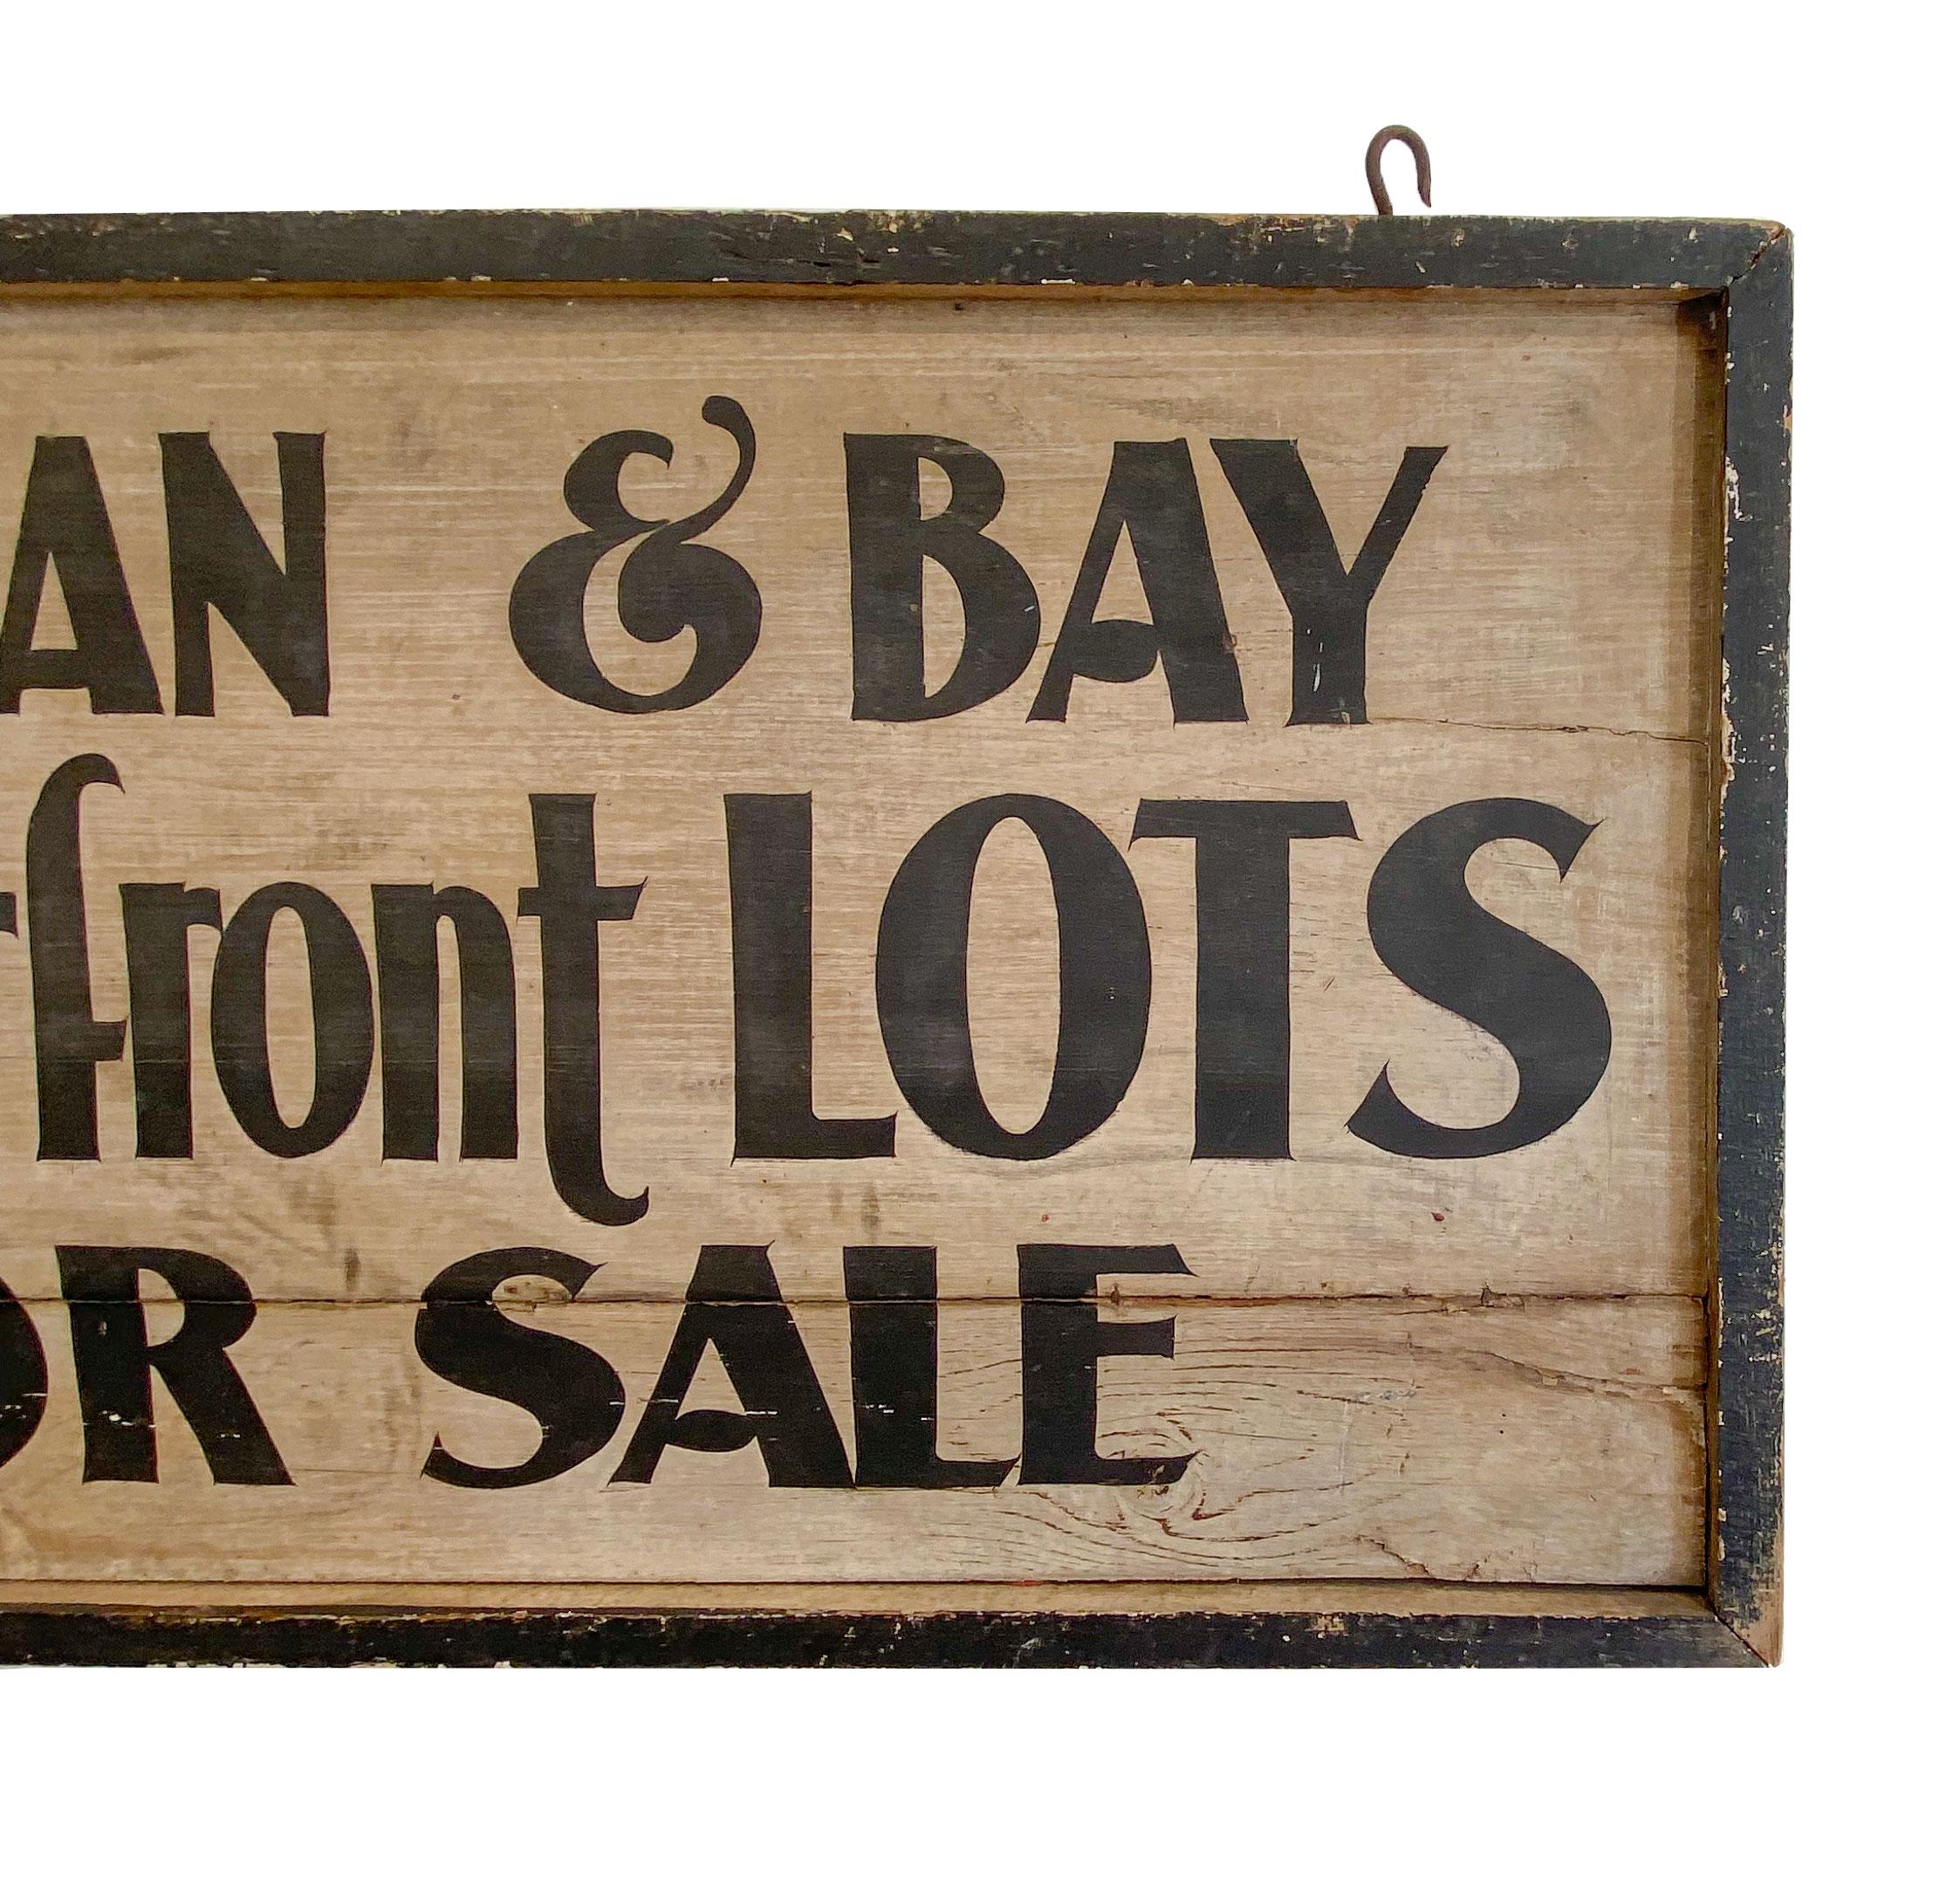 Double sided real estate trade side, original paint on framed wood panel
White ground with black lettering,
Found in Rhode Island, circa 1940.